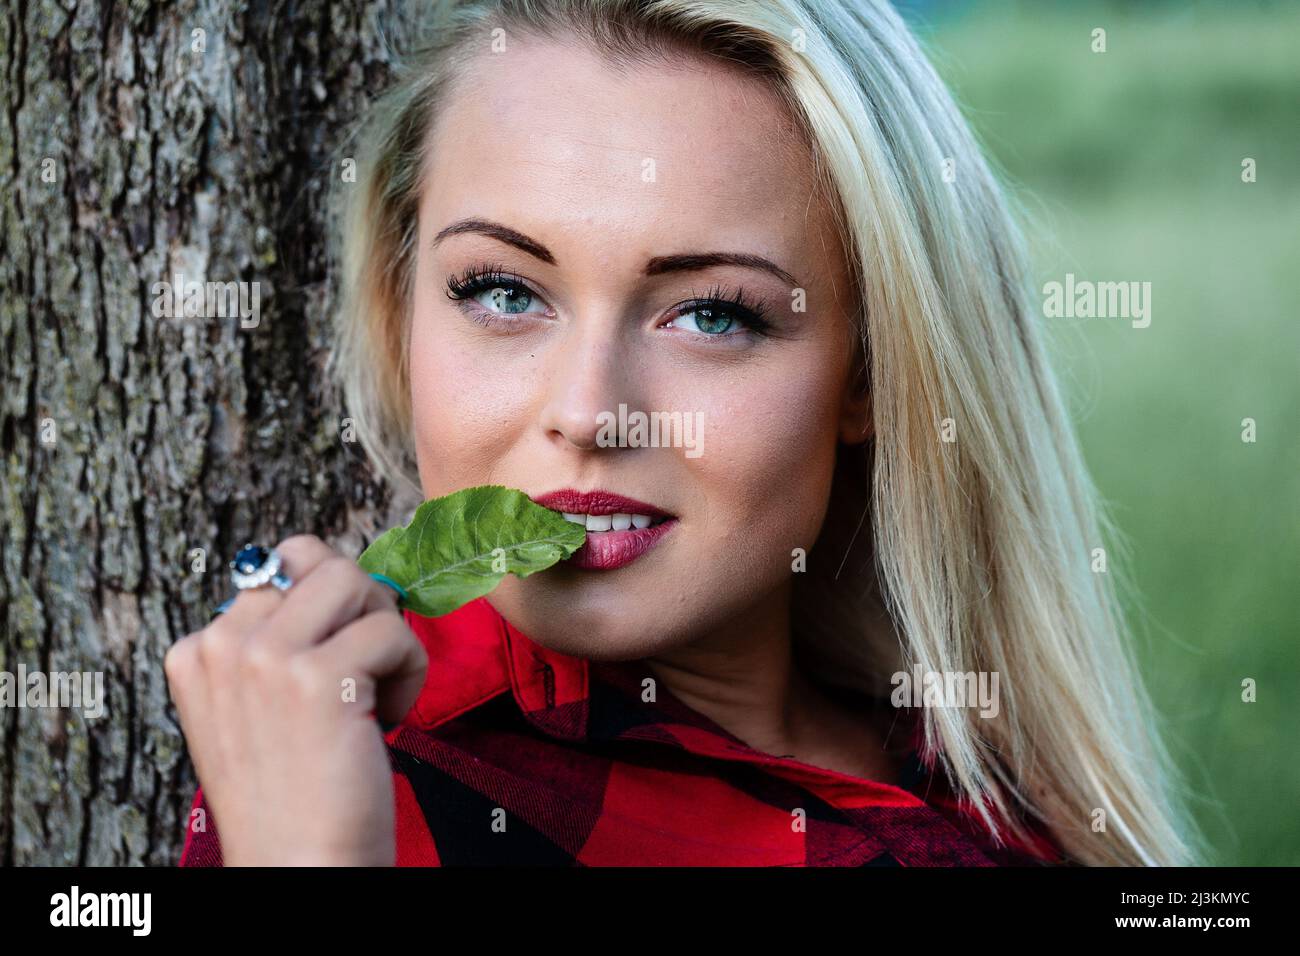 Pensive sensual young blond woman with green leaf to her lips relaxing outdoors looking at the camera with her lovely blue eyes Stock Photo